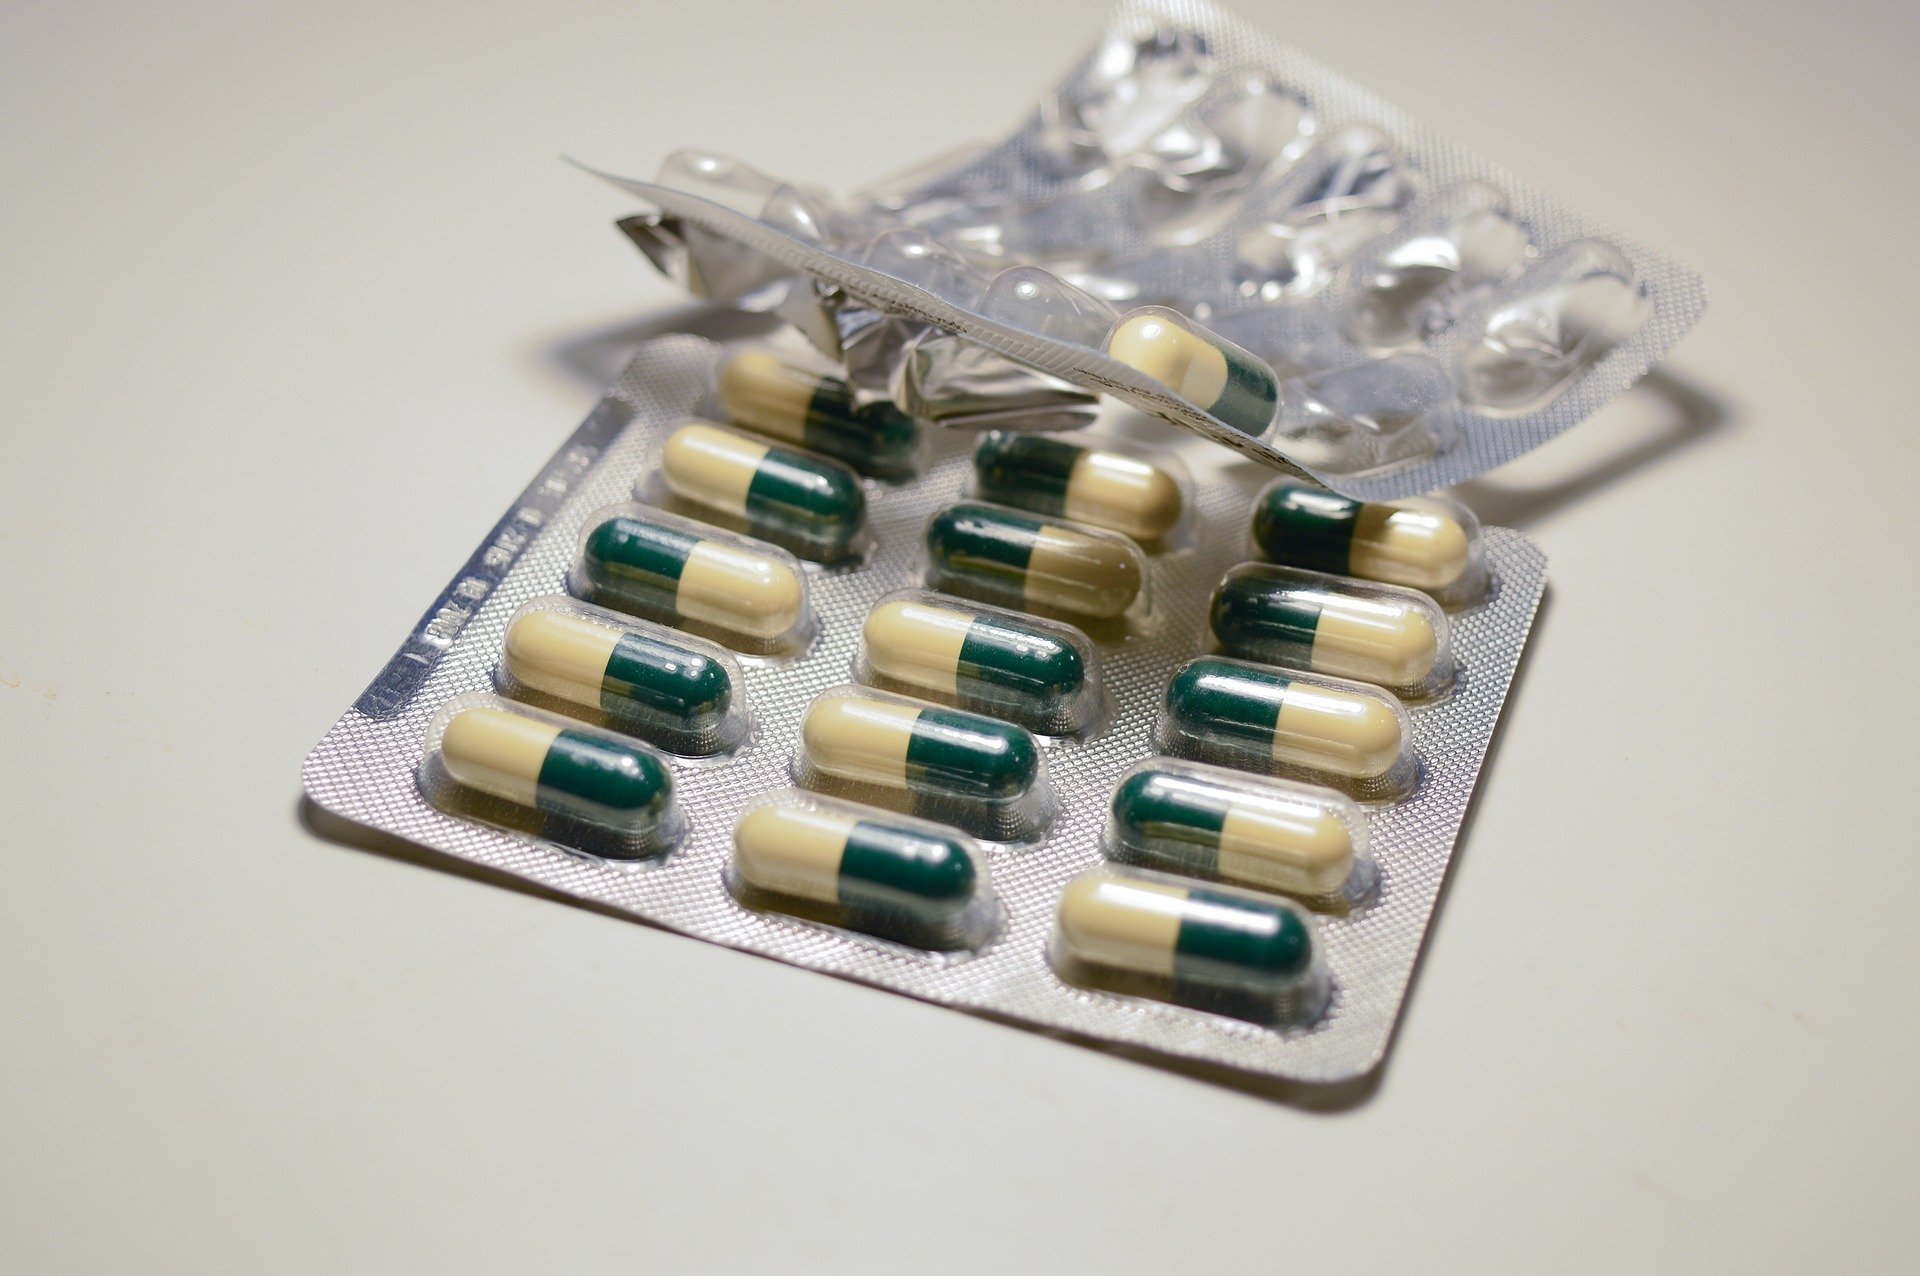 Warning issued as part of 'Keep Antibiotics Working' campaign